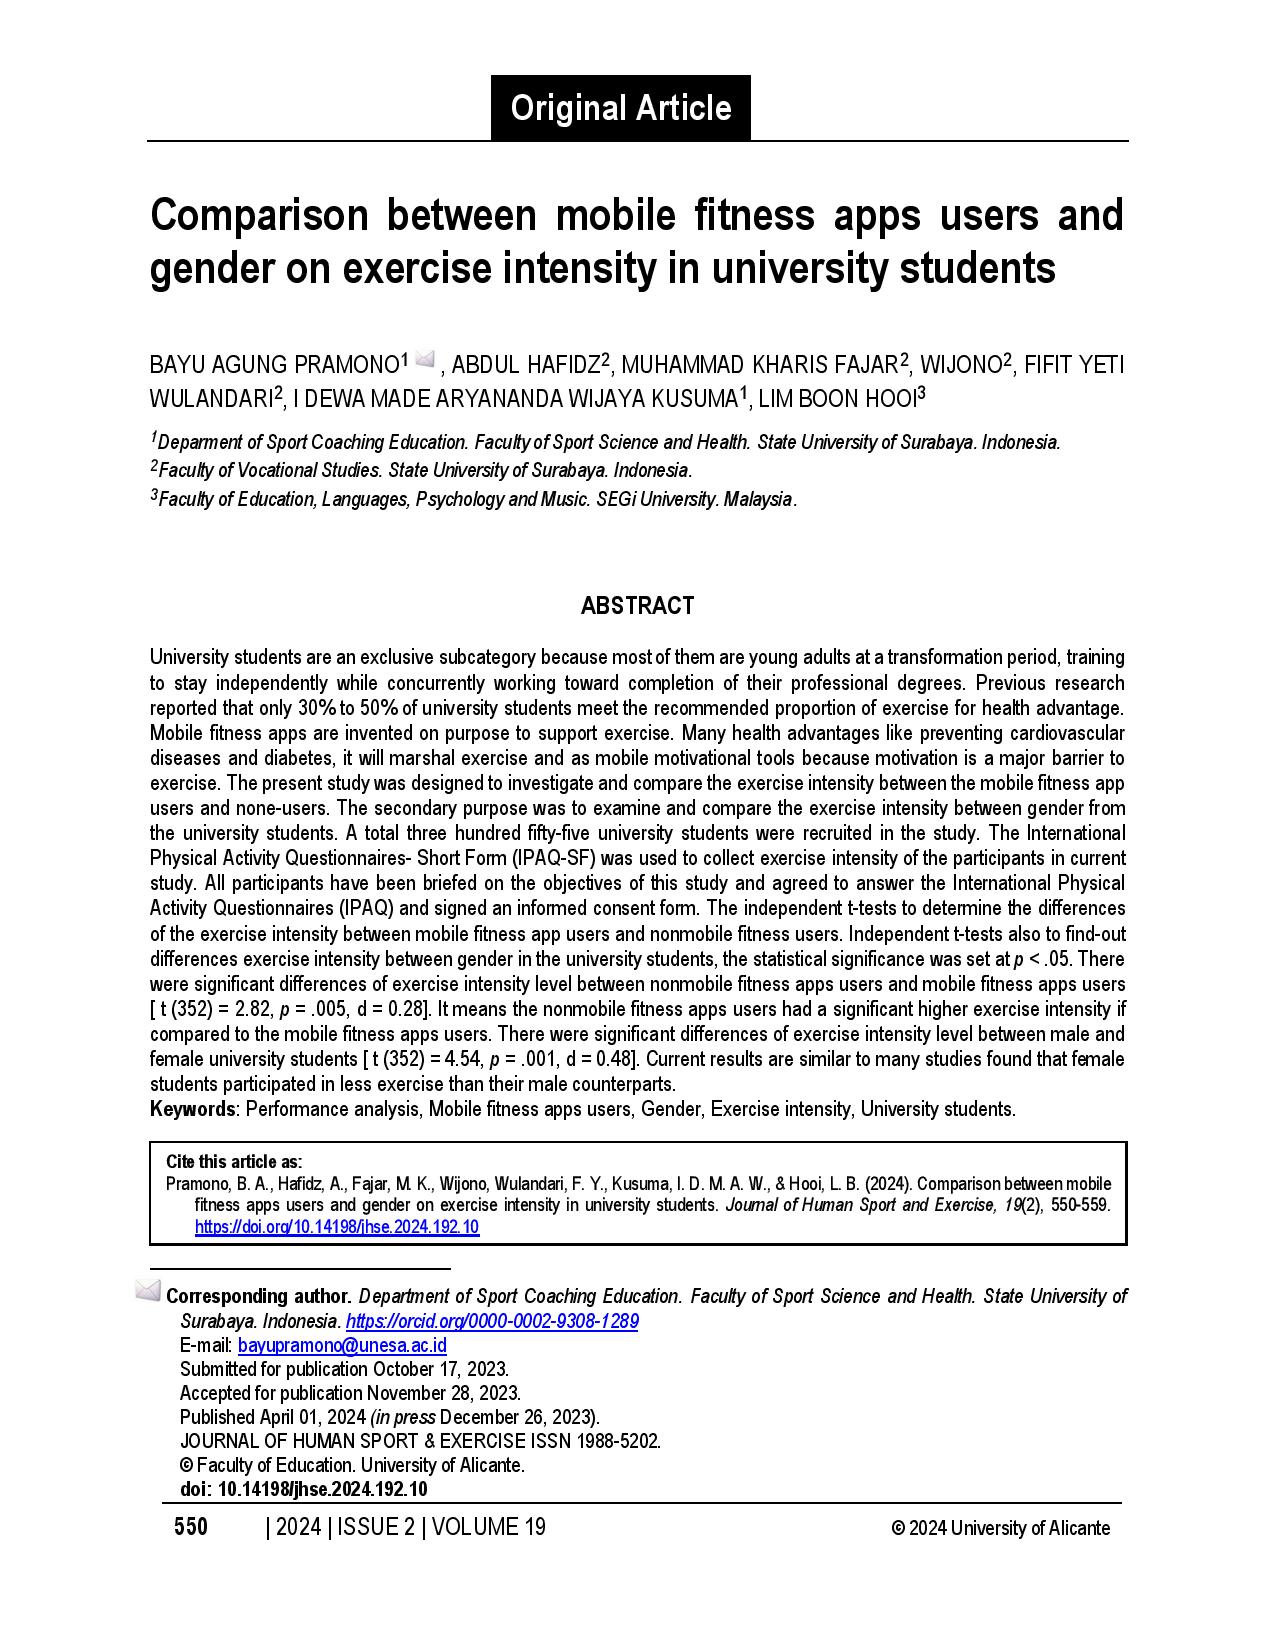 Comparison between mobile fitness apps users and gender on exercise intensity in university students